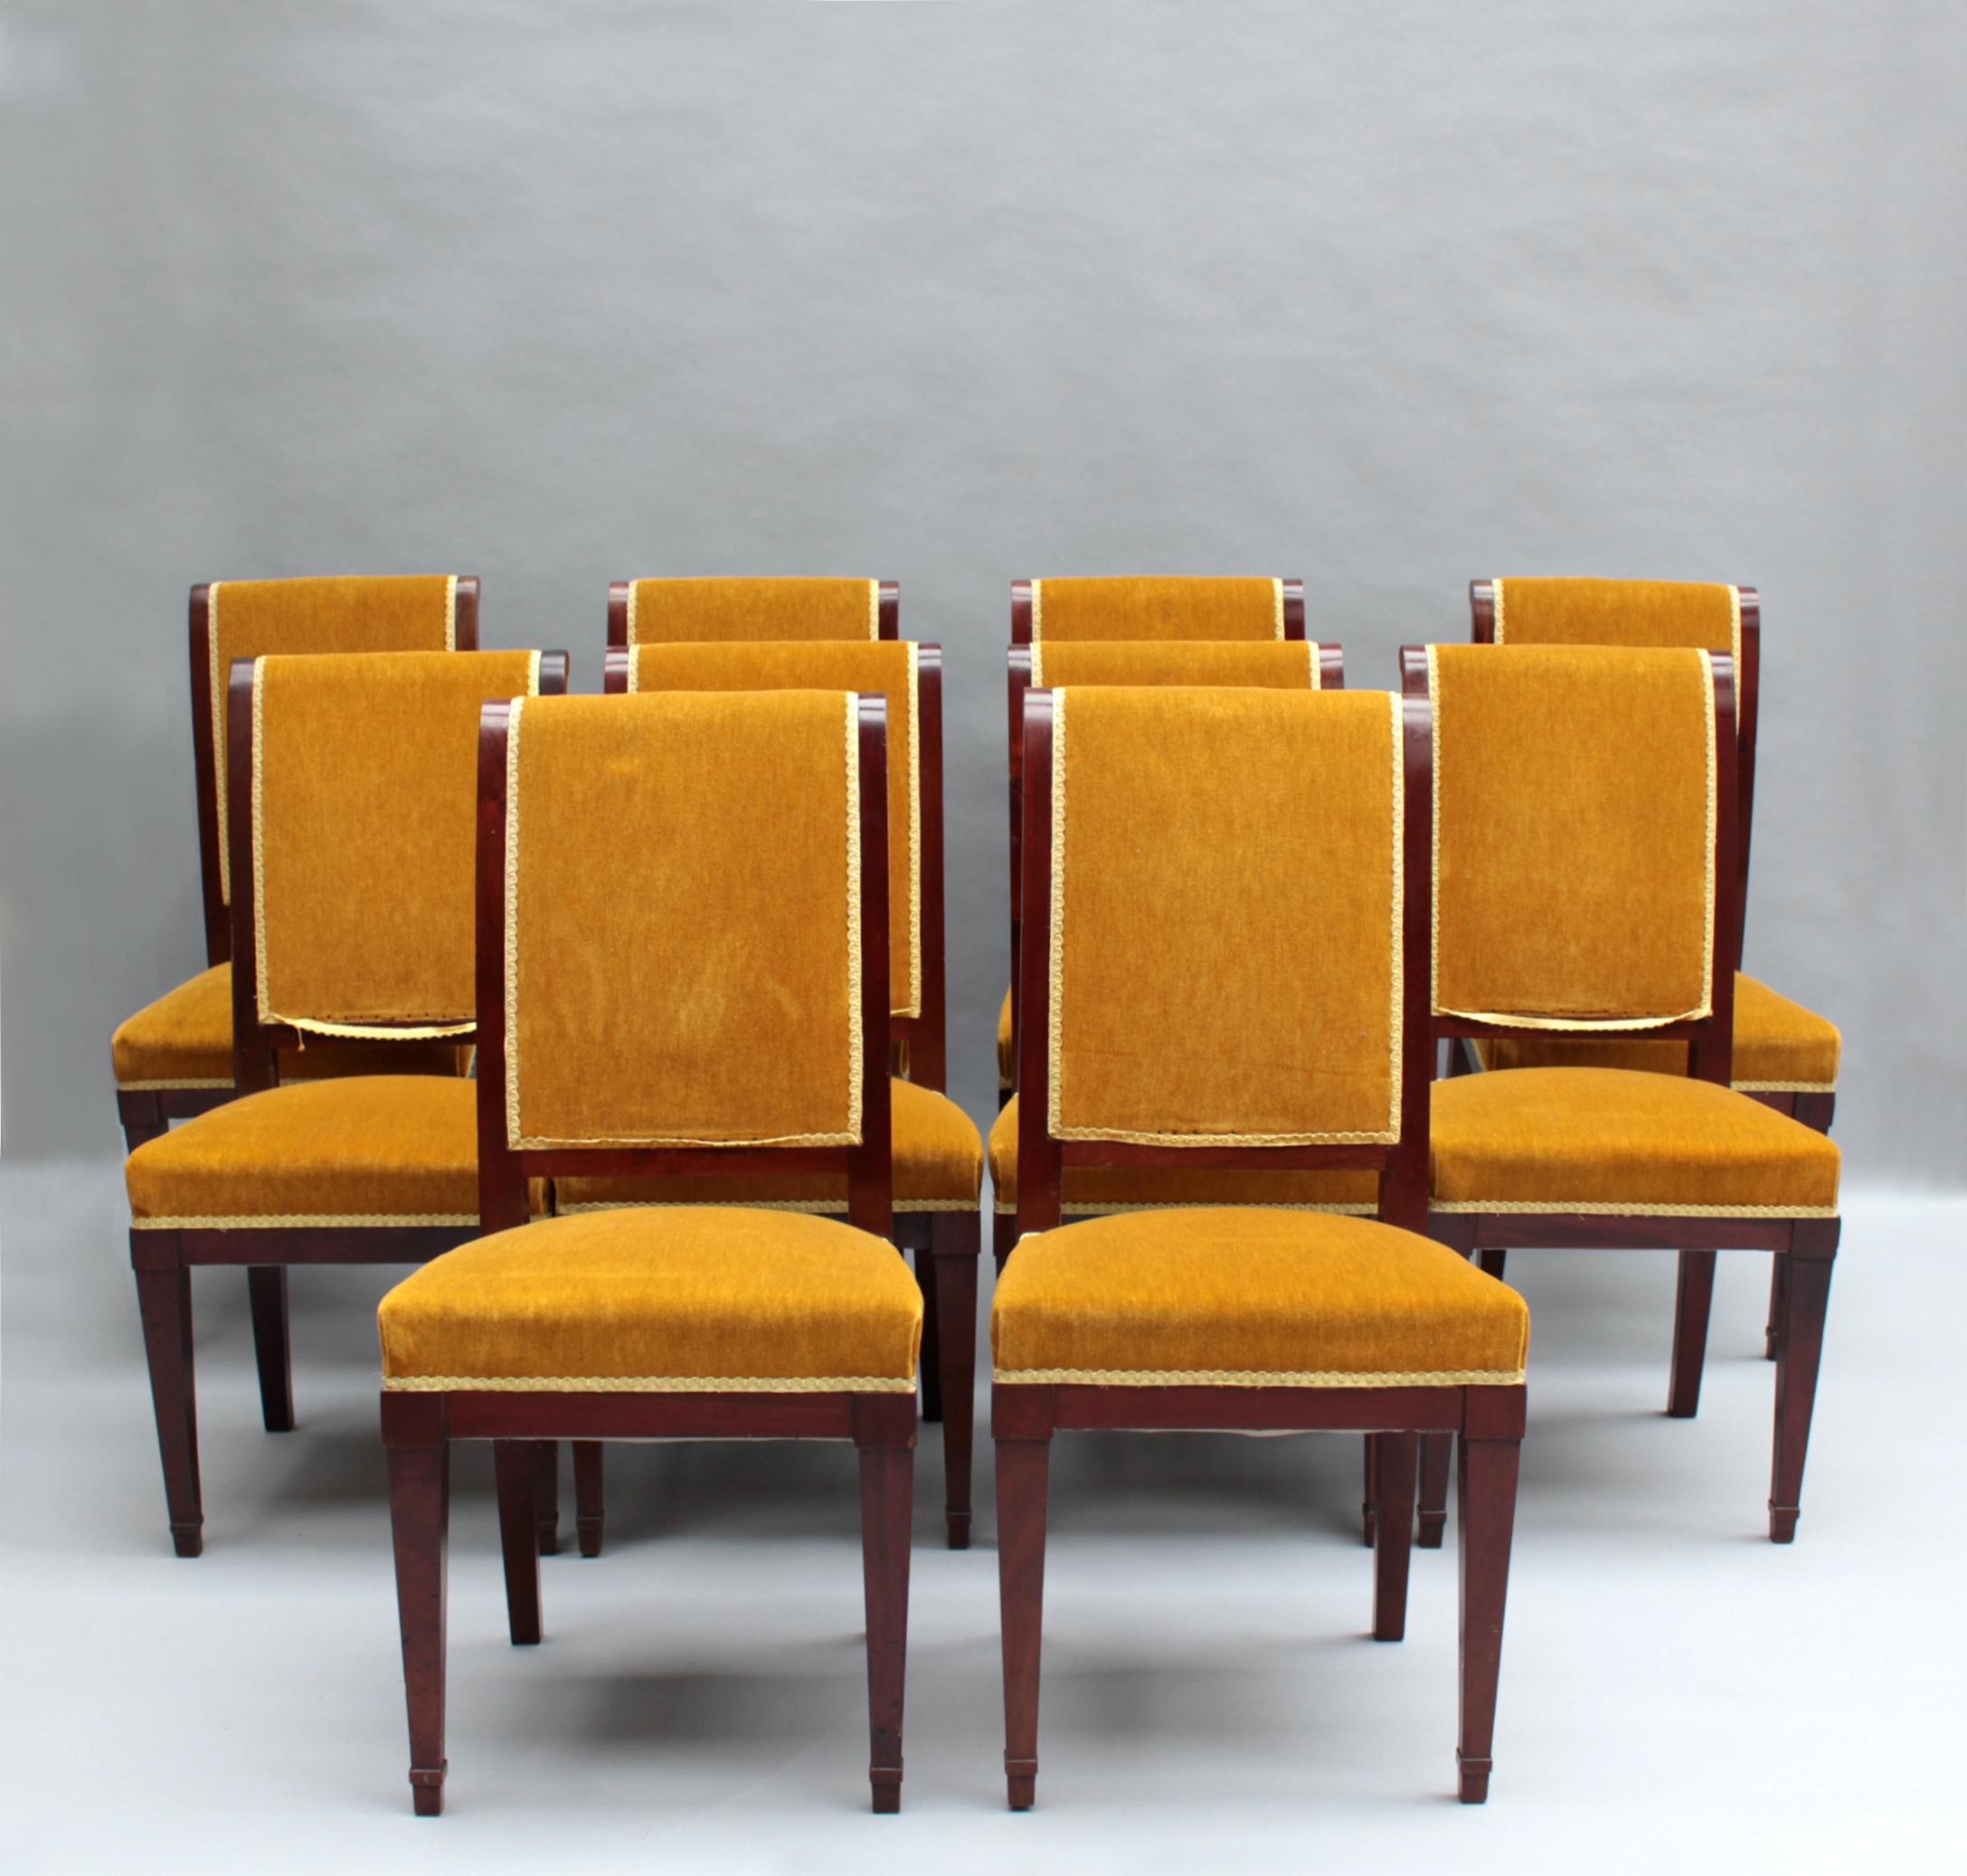 A set of ten fine French 1930s solid mahogany dining/side chairs.

